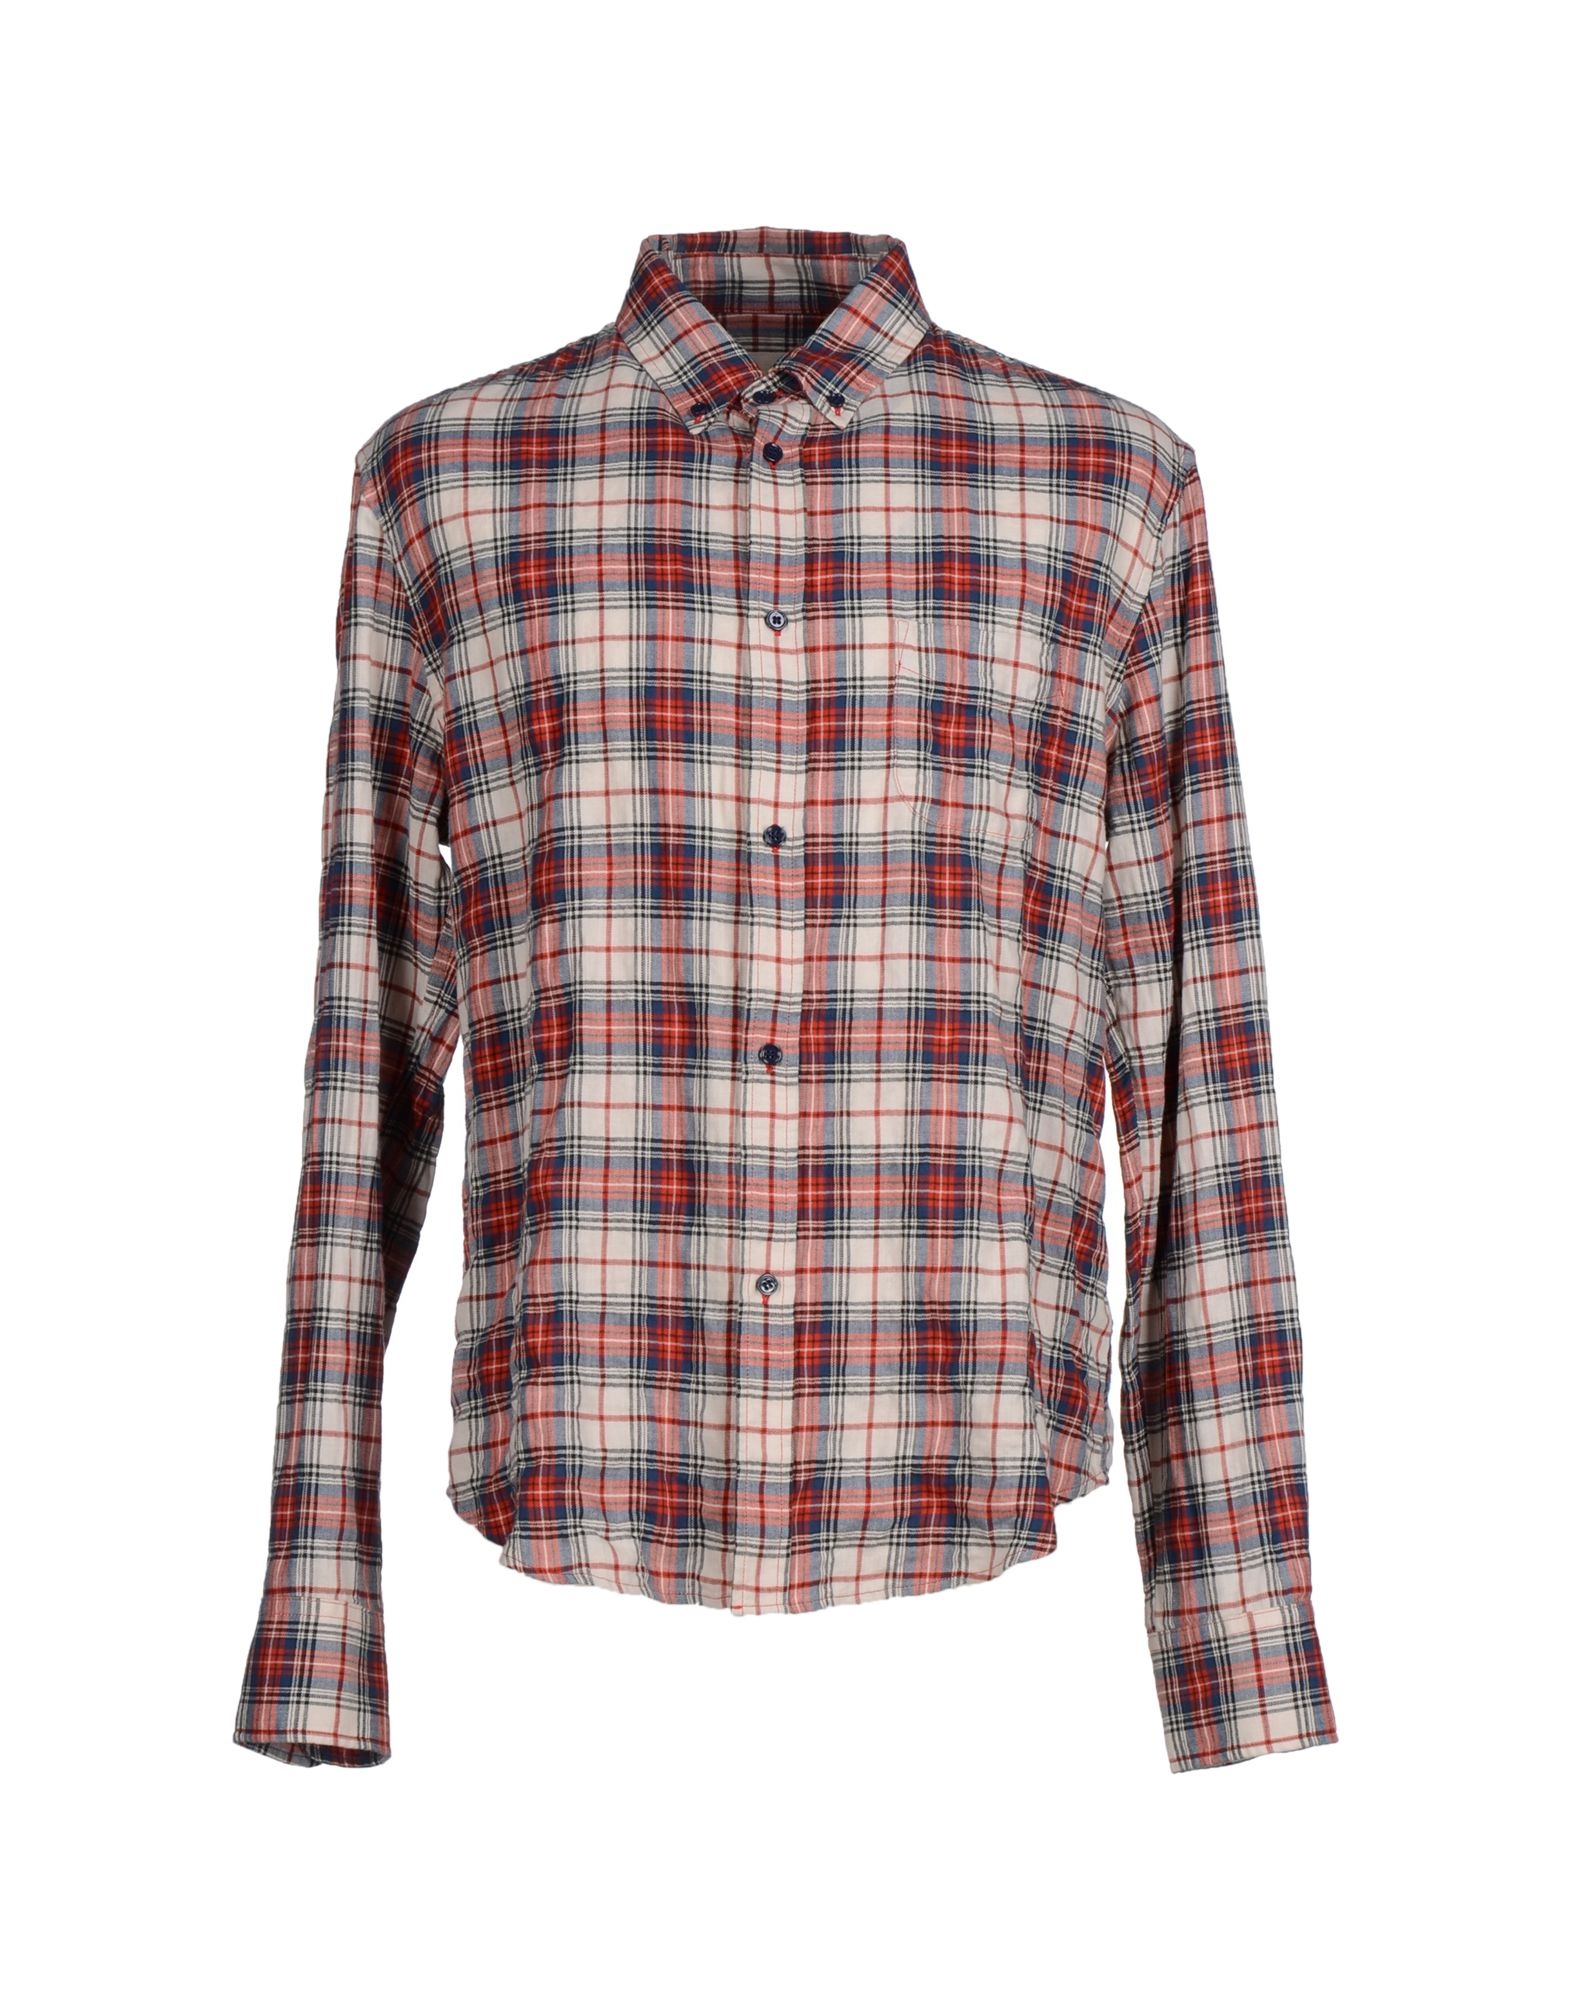 Lyst - Band Of Outsiders Shirt in Red for Men